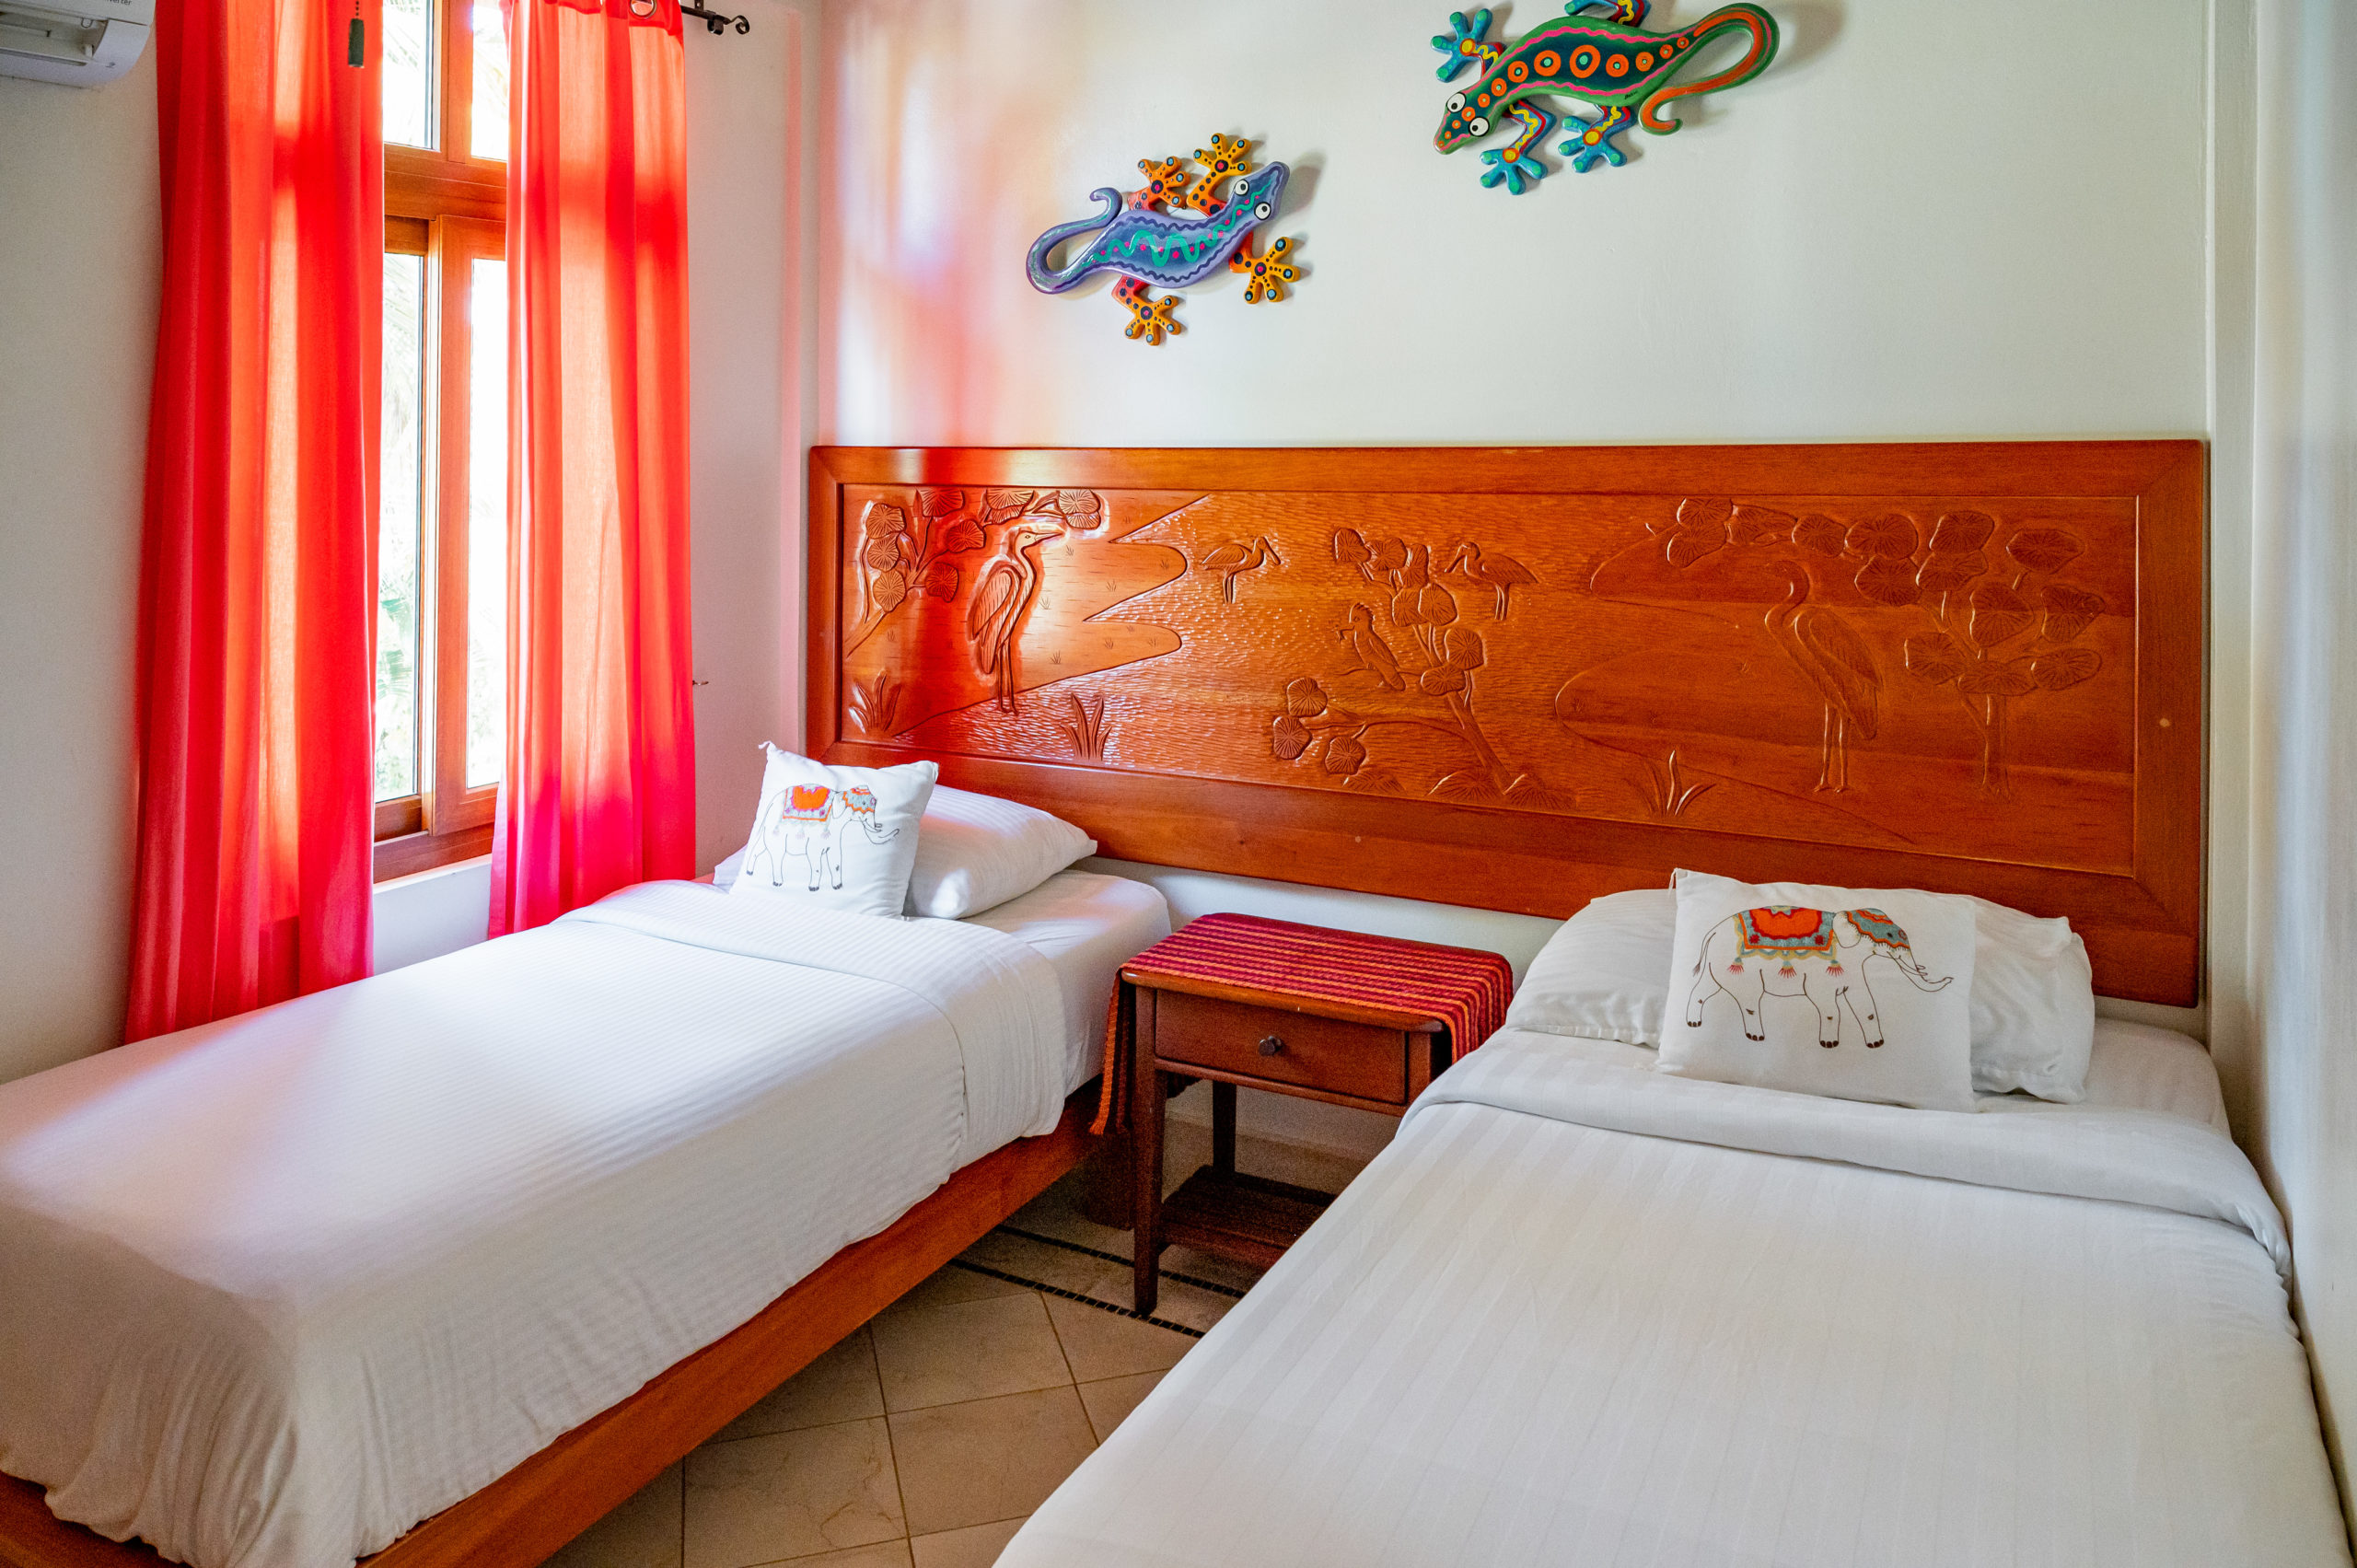 Bringing the kids along? Themed rooms keep Belizean delights dancing in through their dreams all night.